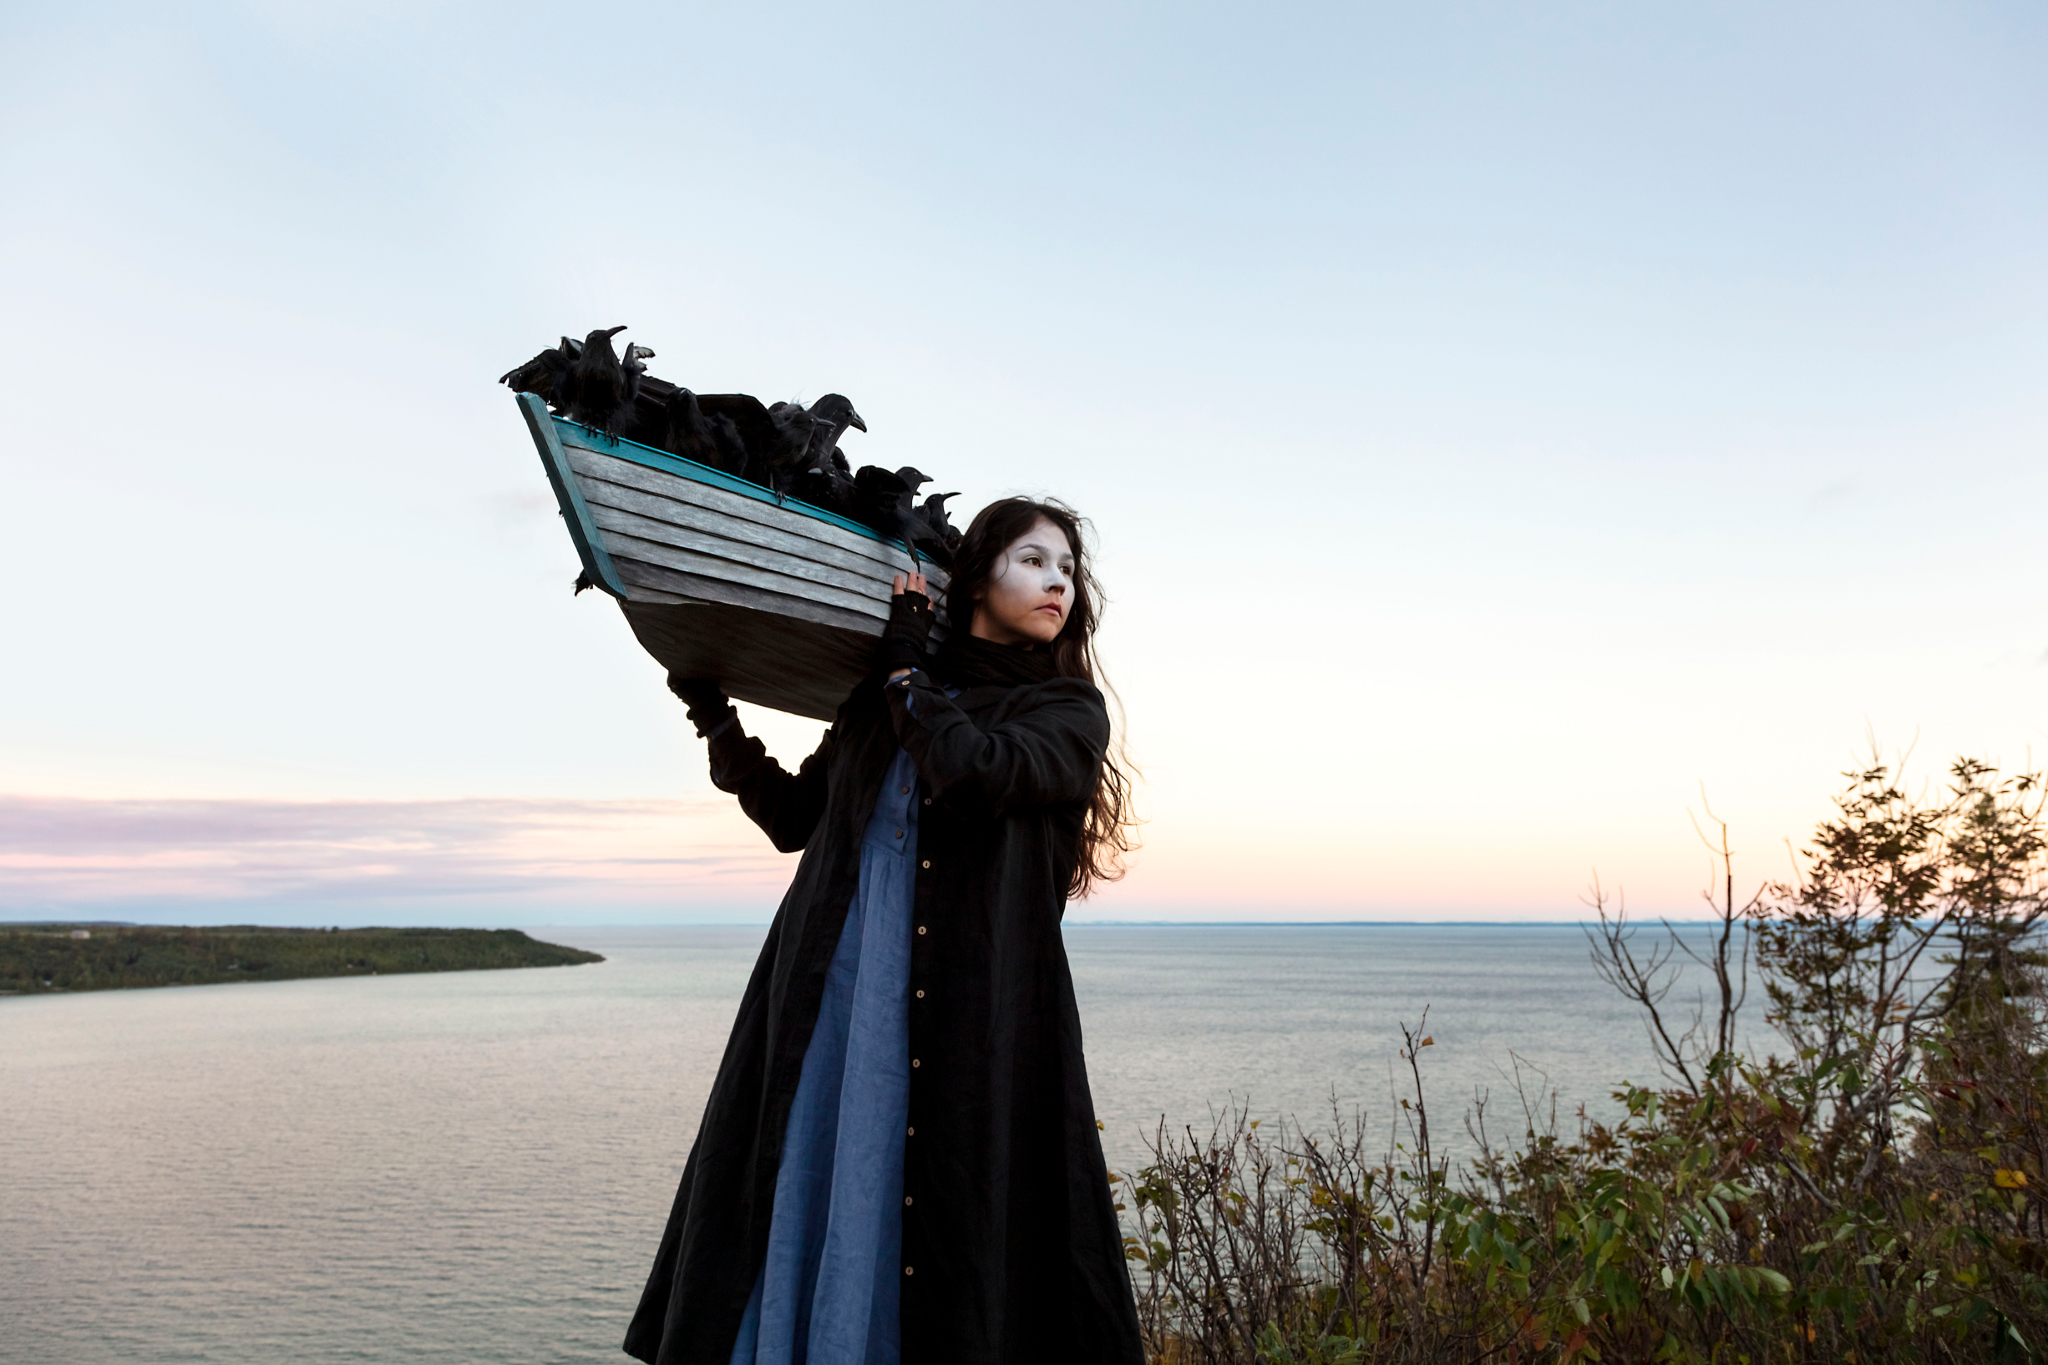 On the Edge of this Immensity by Meryl McMaster